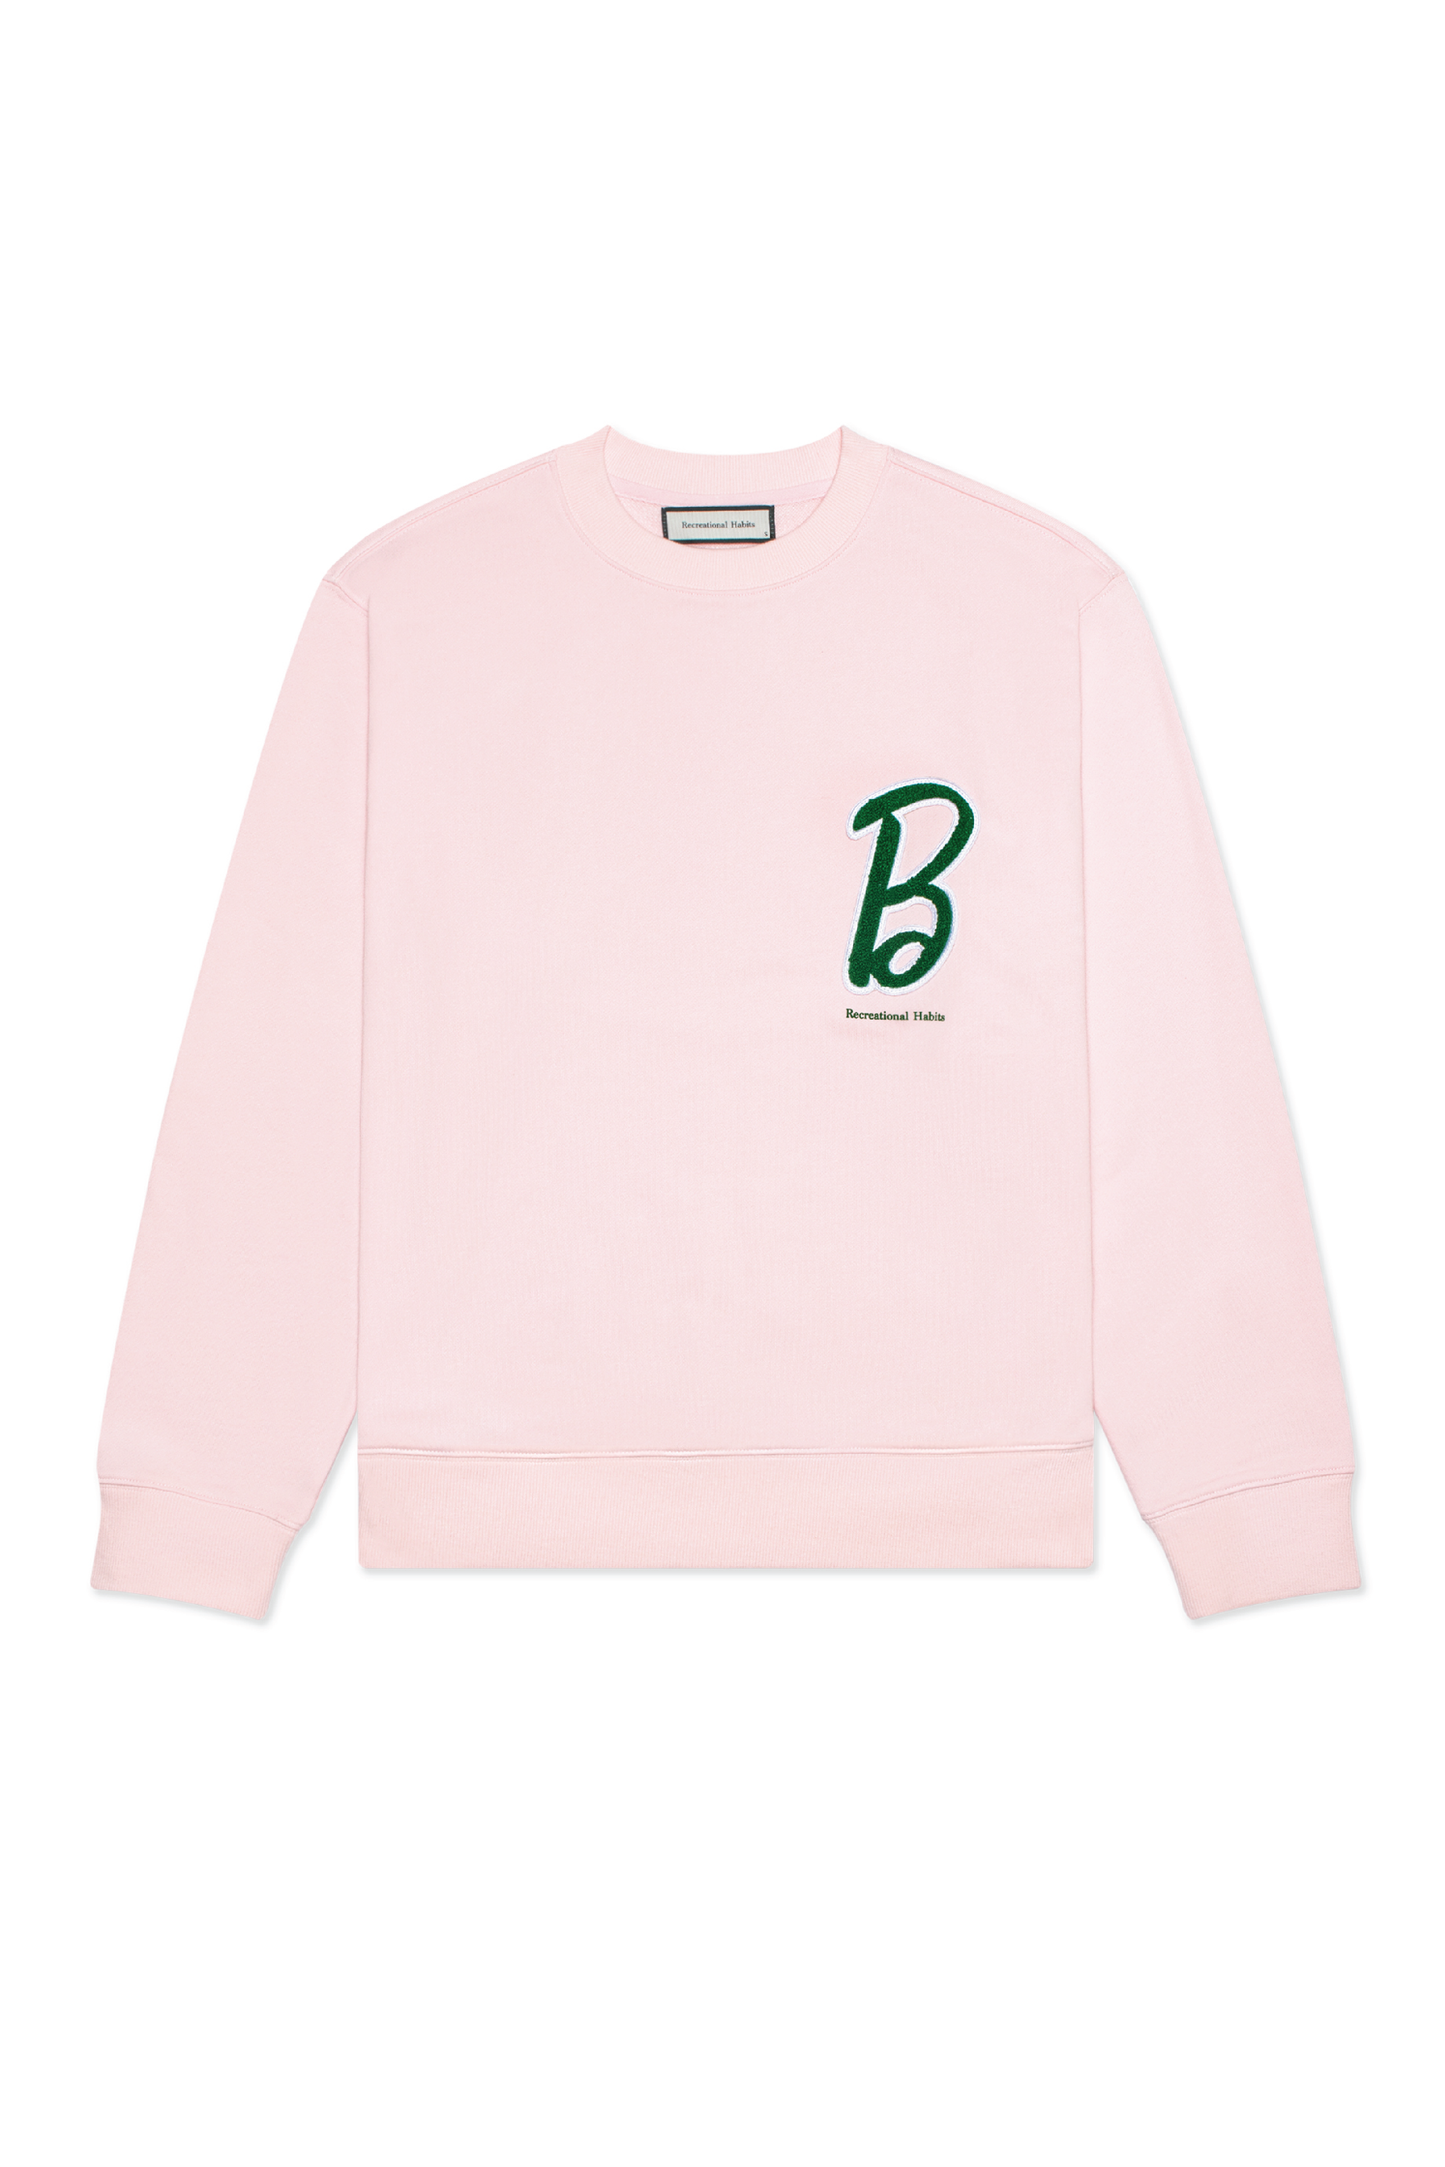 RH x @Barbiestyle™ Chenille Crewneck in Pink French Terry